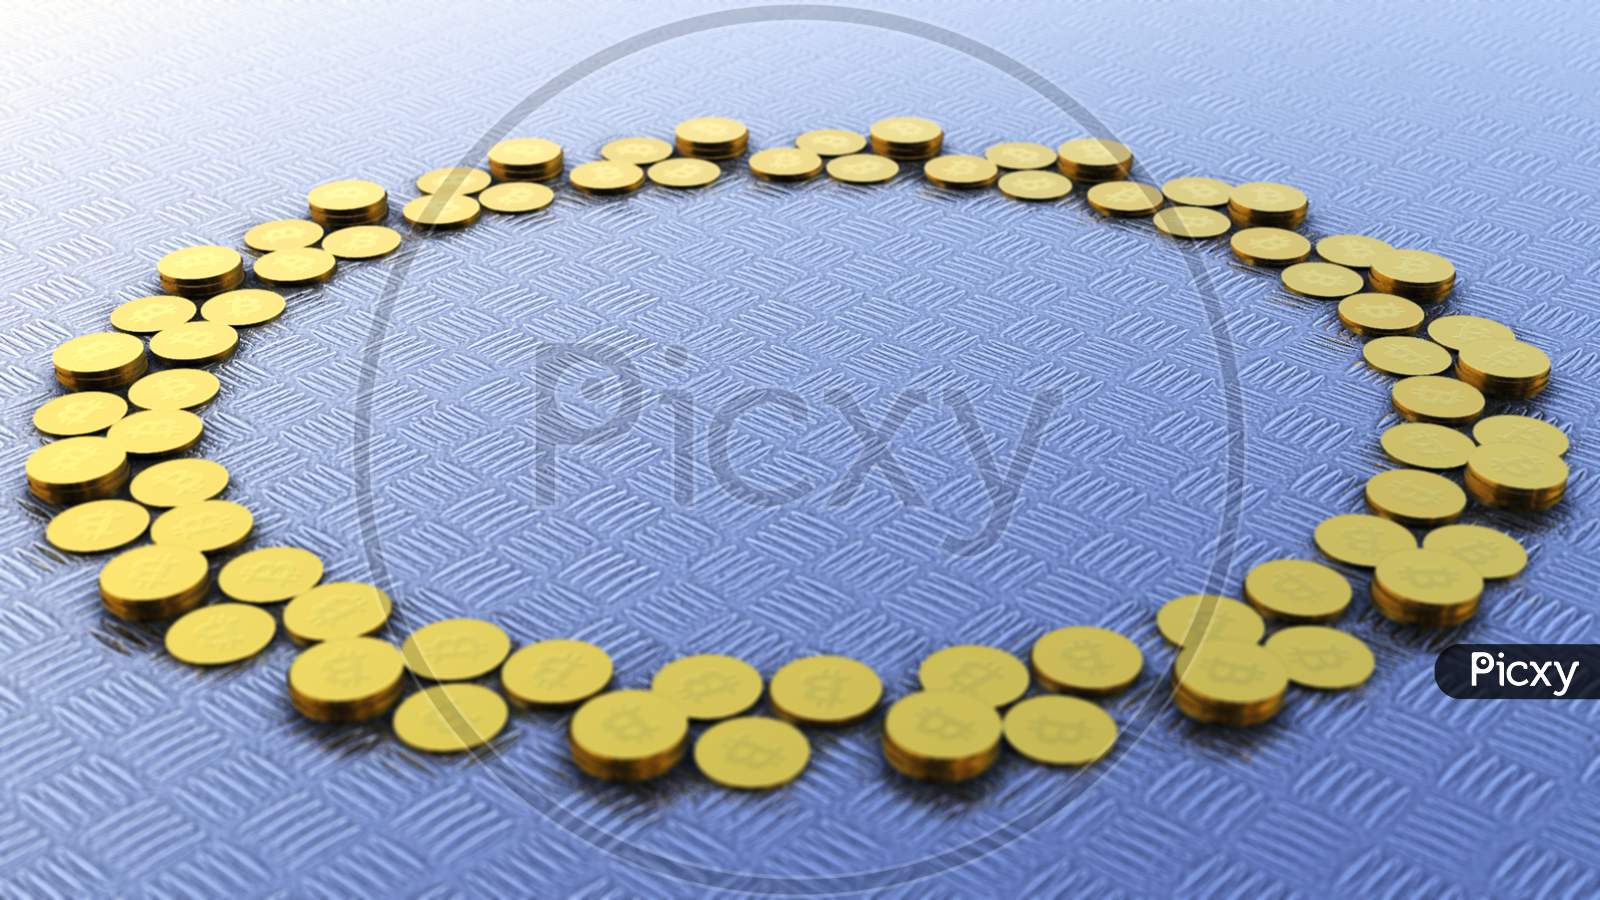 Bitcoins In Circle With Rotating Camera Movement, Crypto Currency, Btc Currency, Business And Technology Concept, 4K High Quality